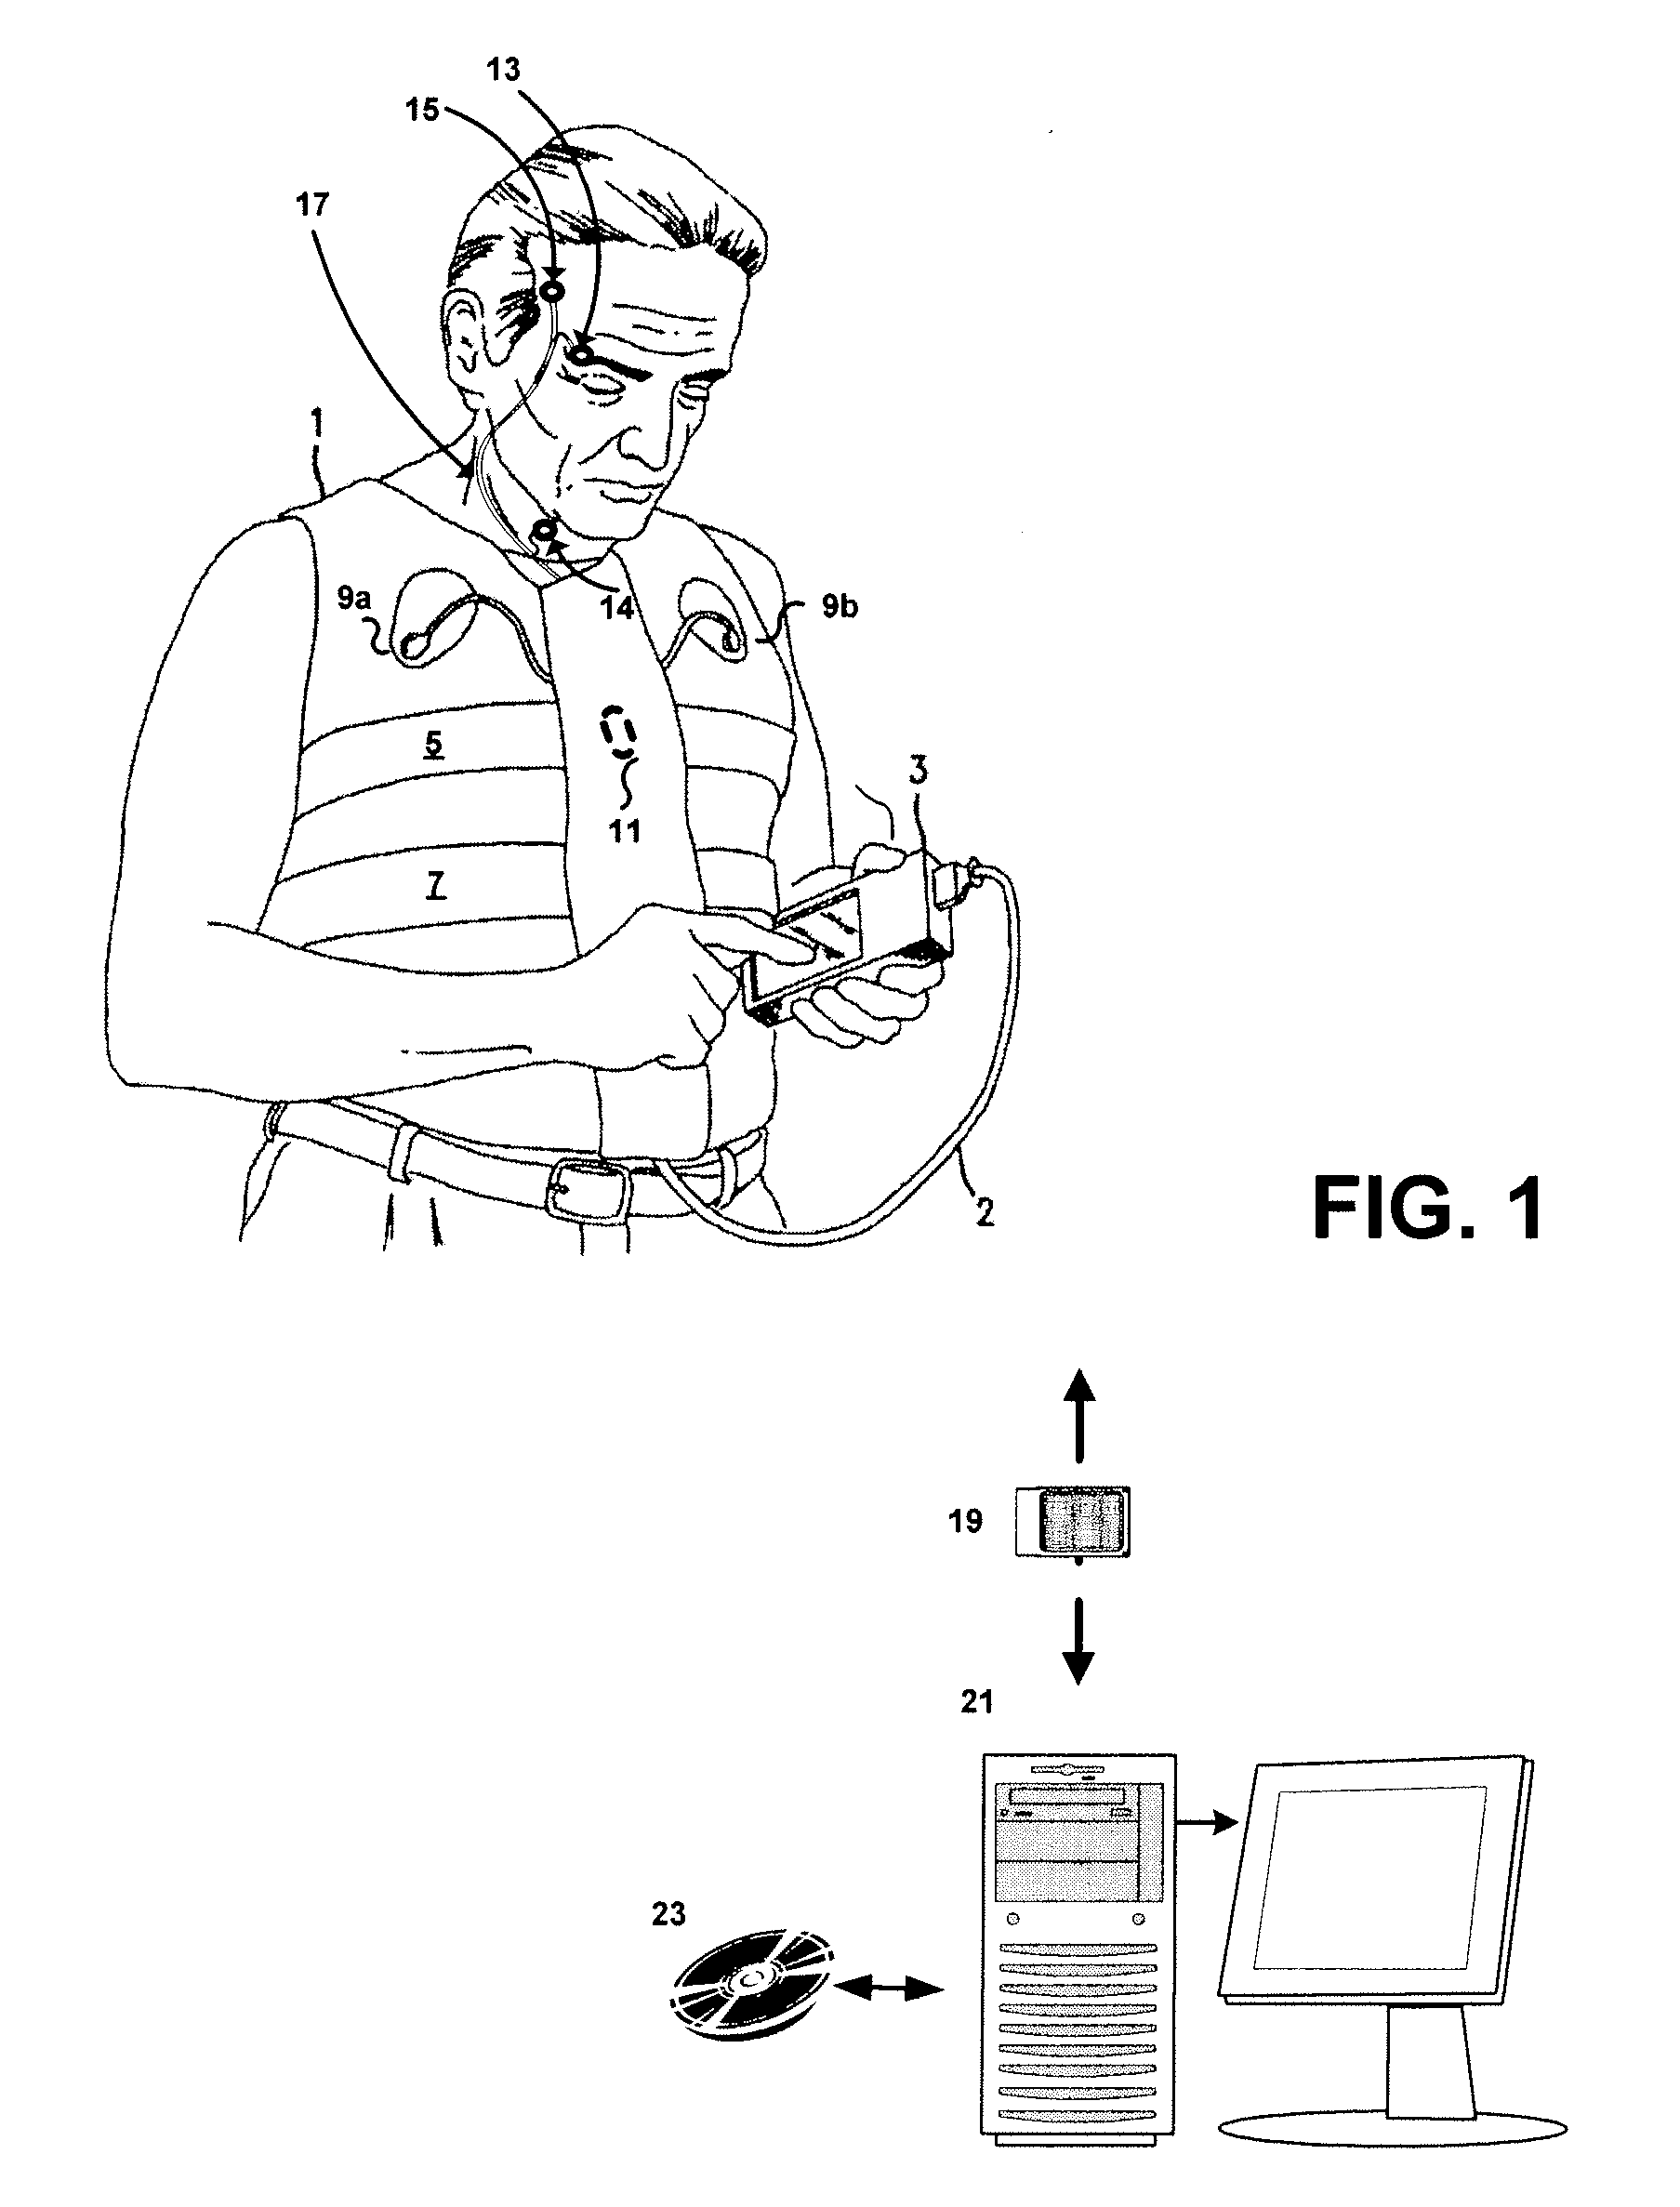 Systems and methods for monitoring cough